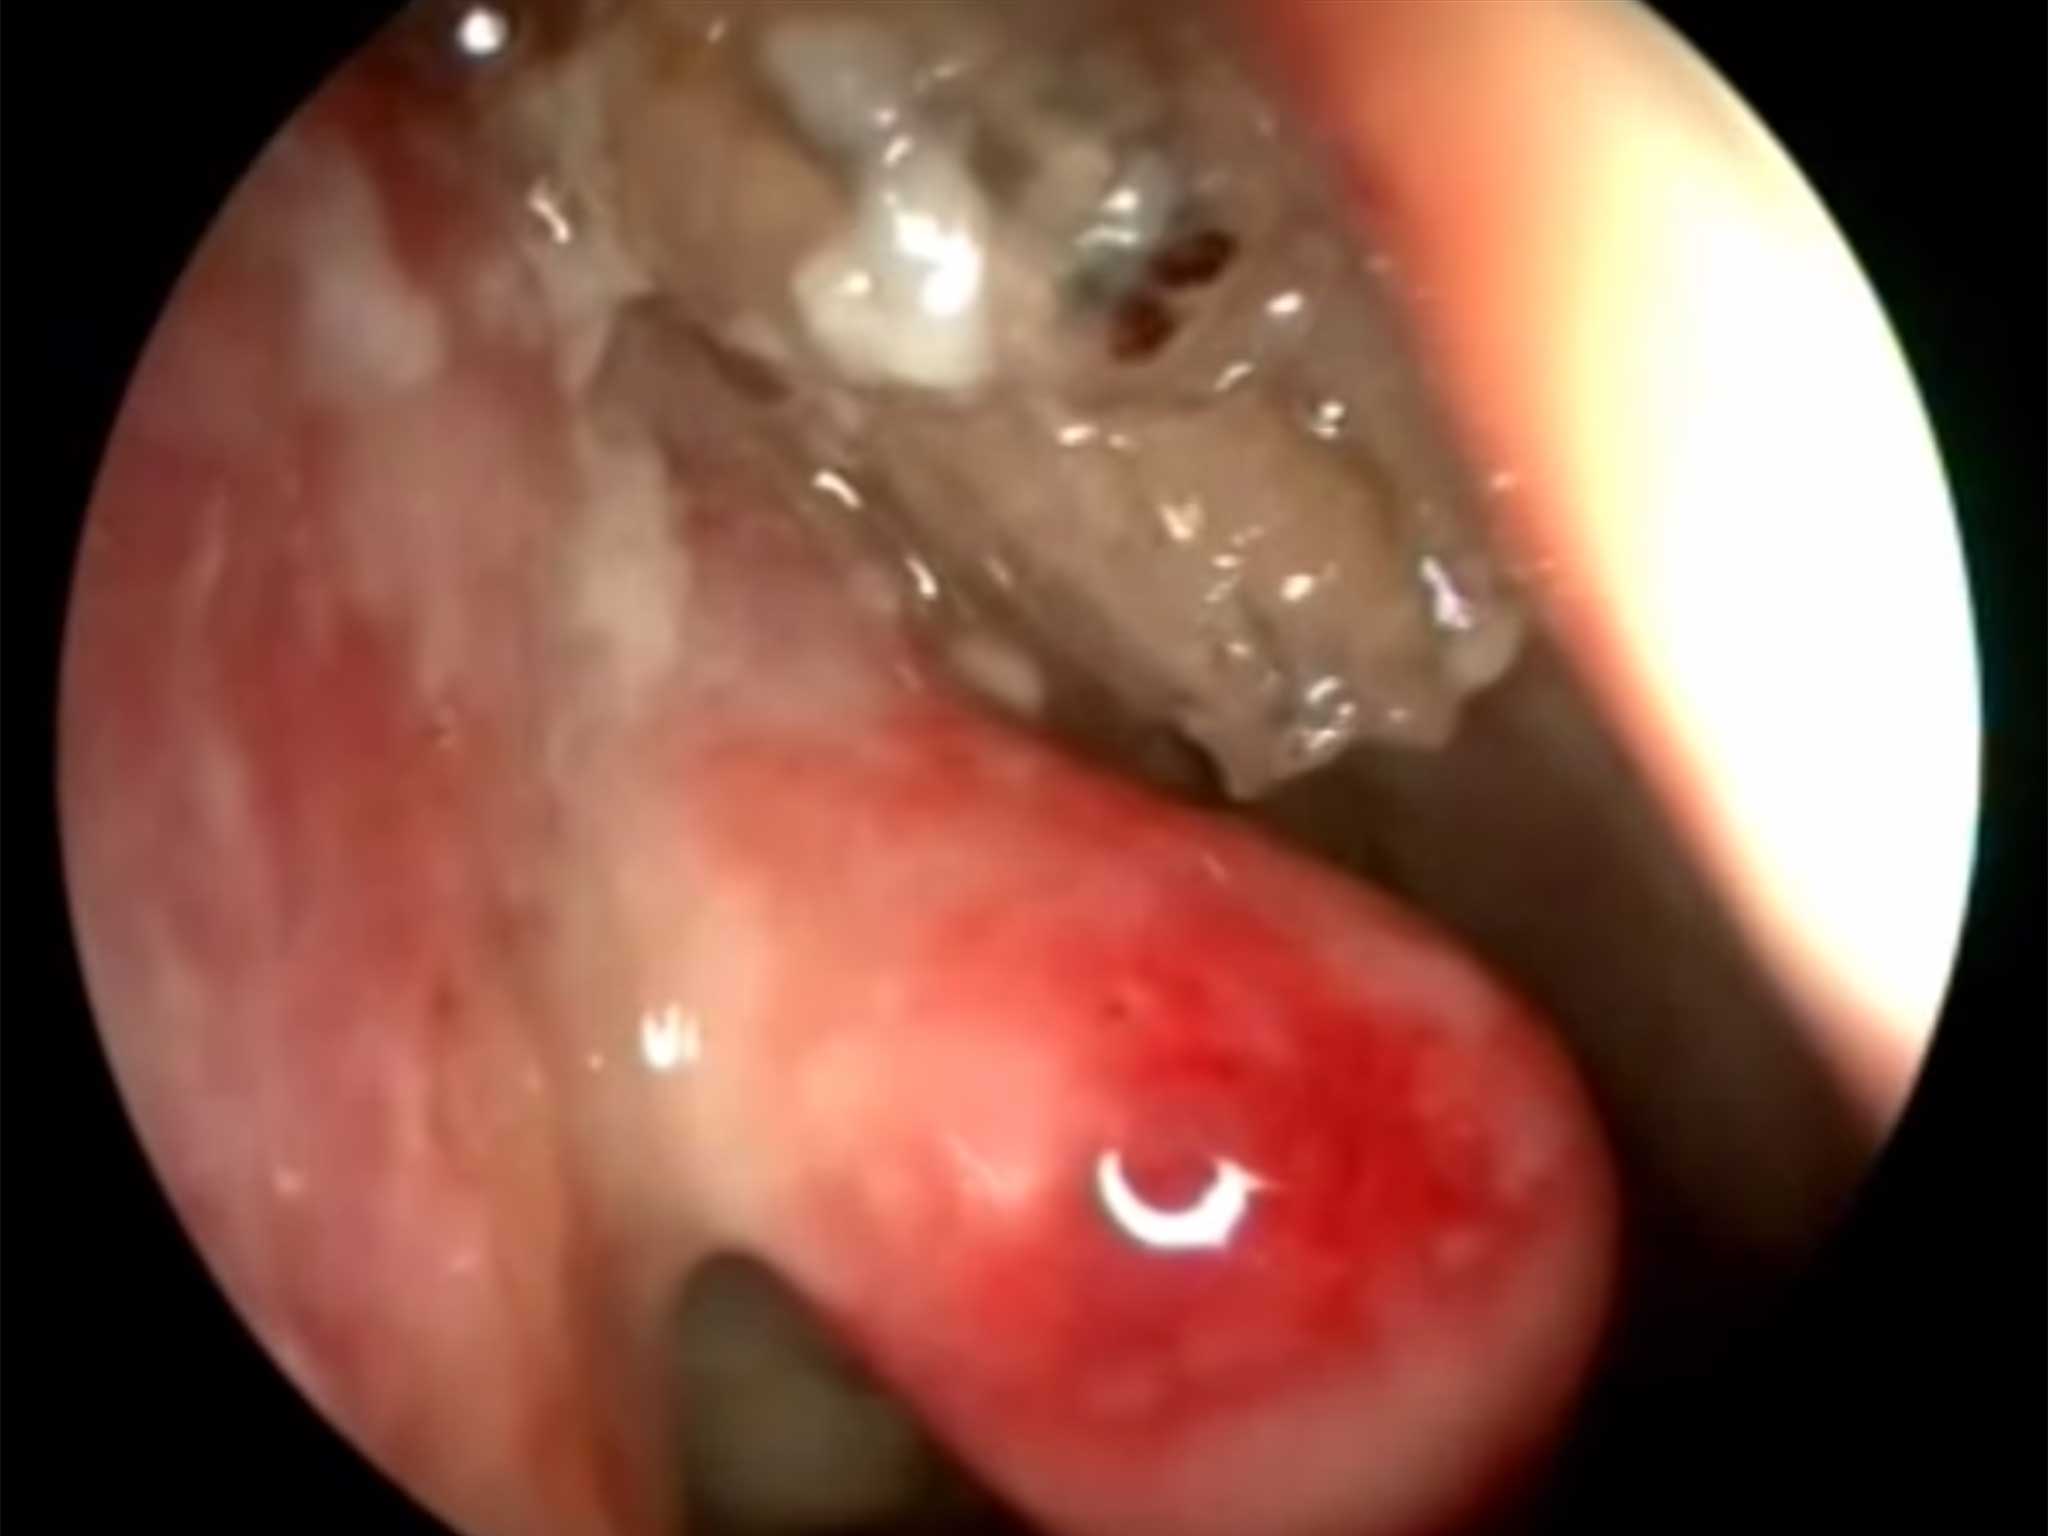 Image from the camera inside the man's nose - the maggots are white